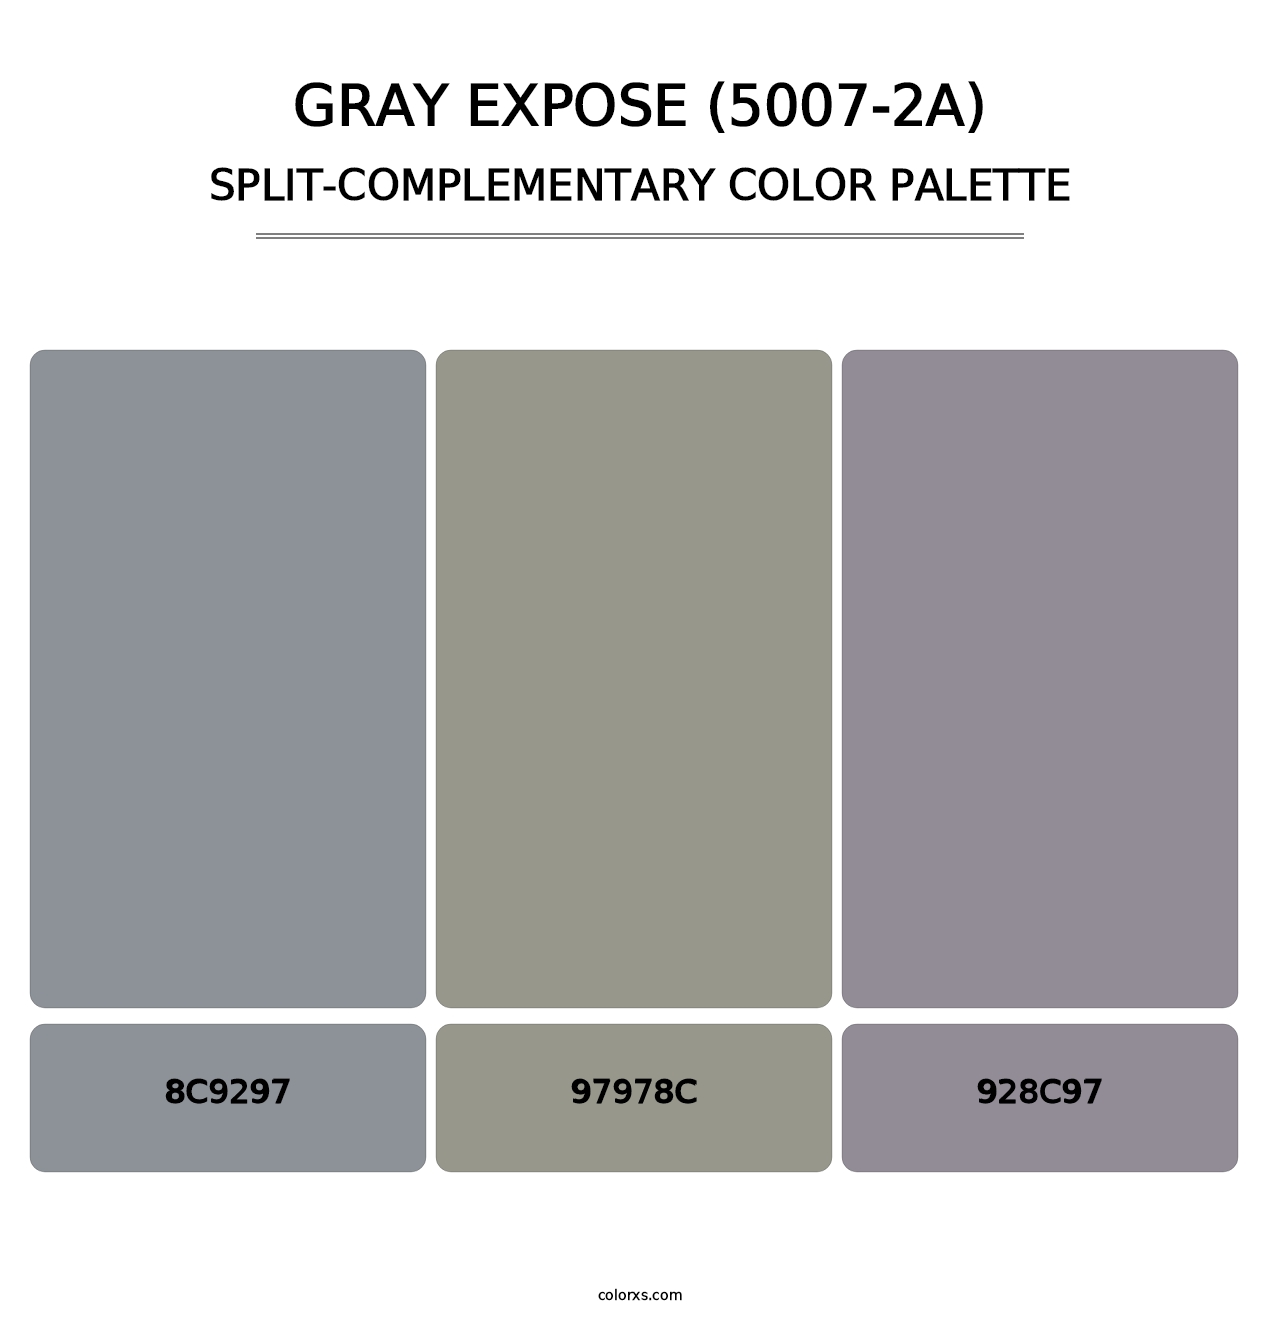 Gray Expose (5007-2A) - Split-Complementary Color Palette